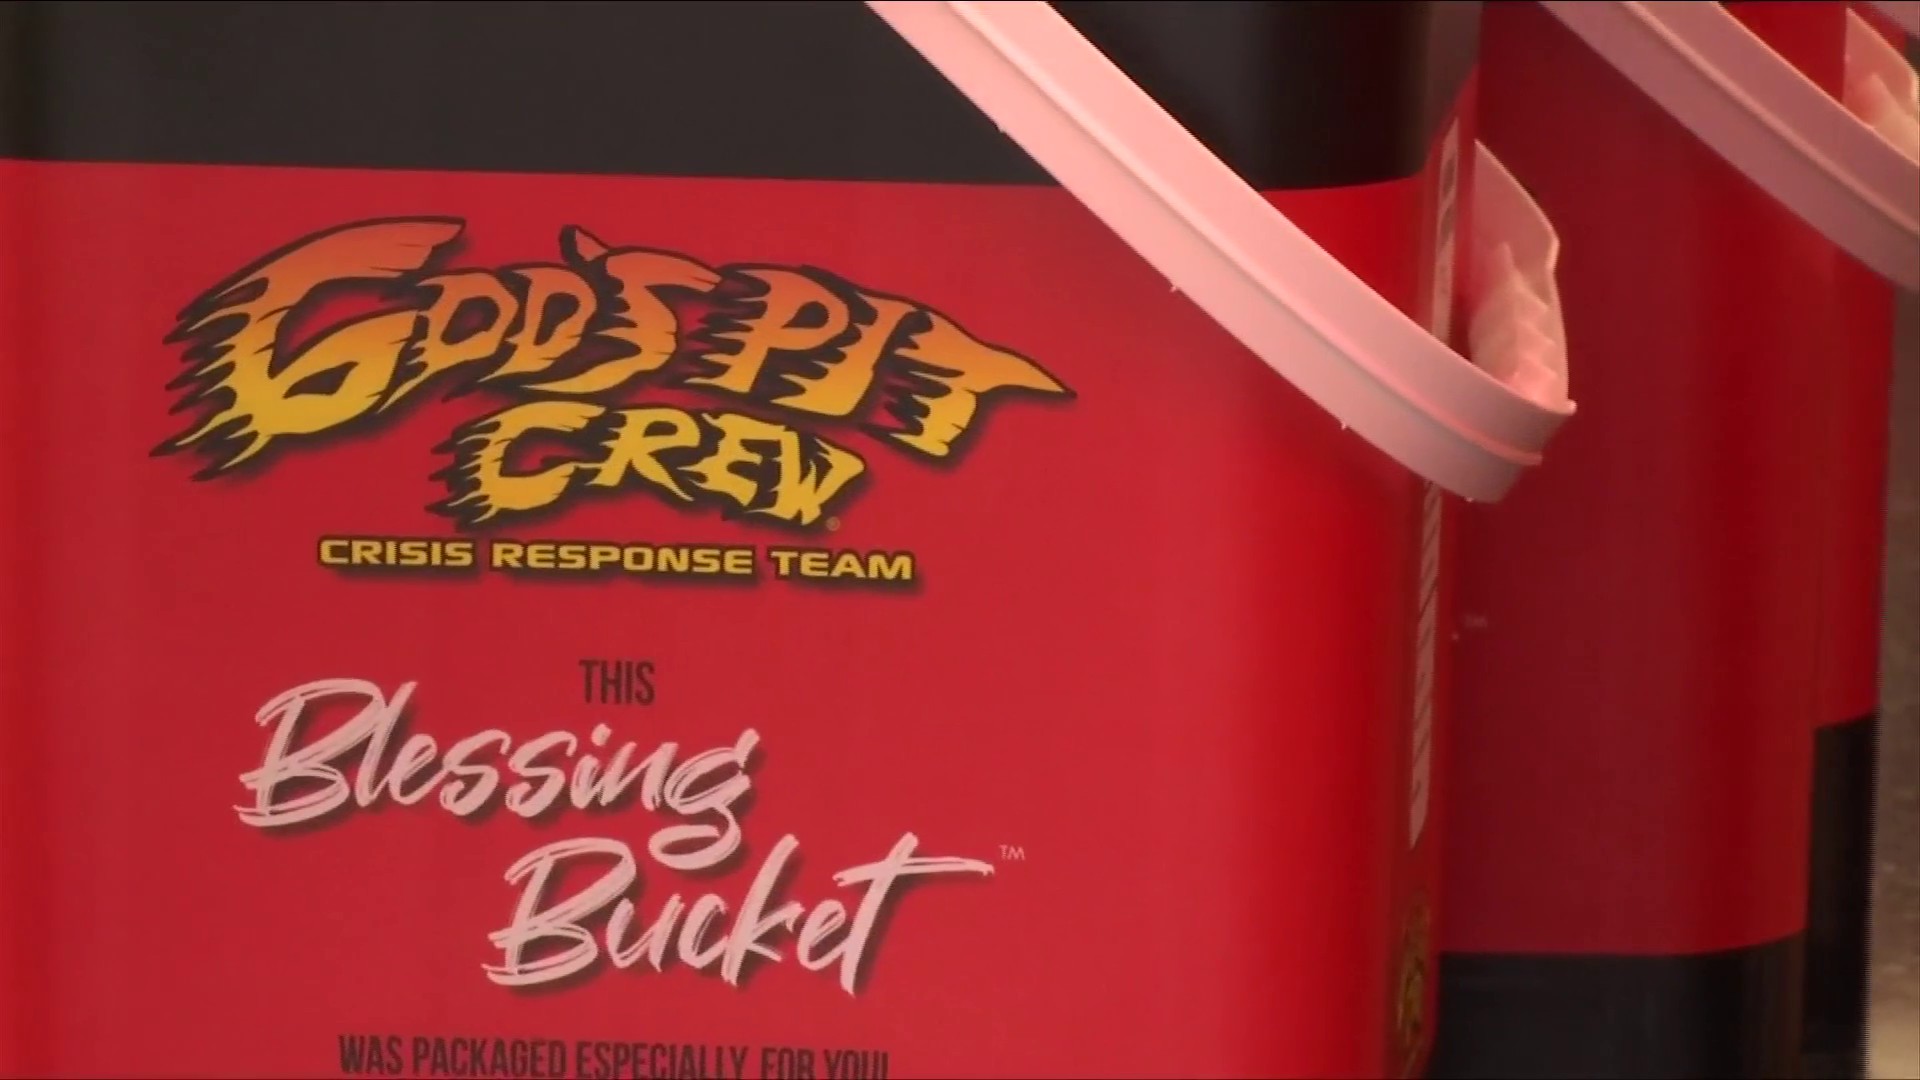 God's Pit Crew hosts first mobile blessing bucket packing event